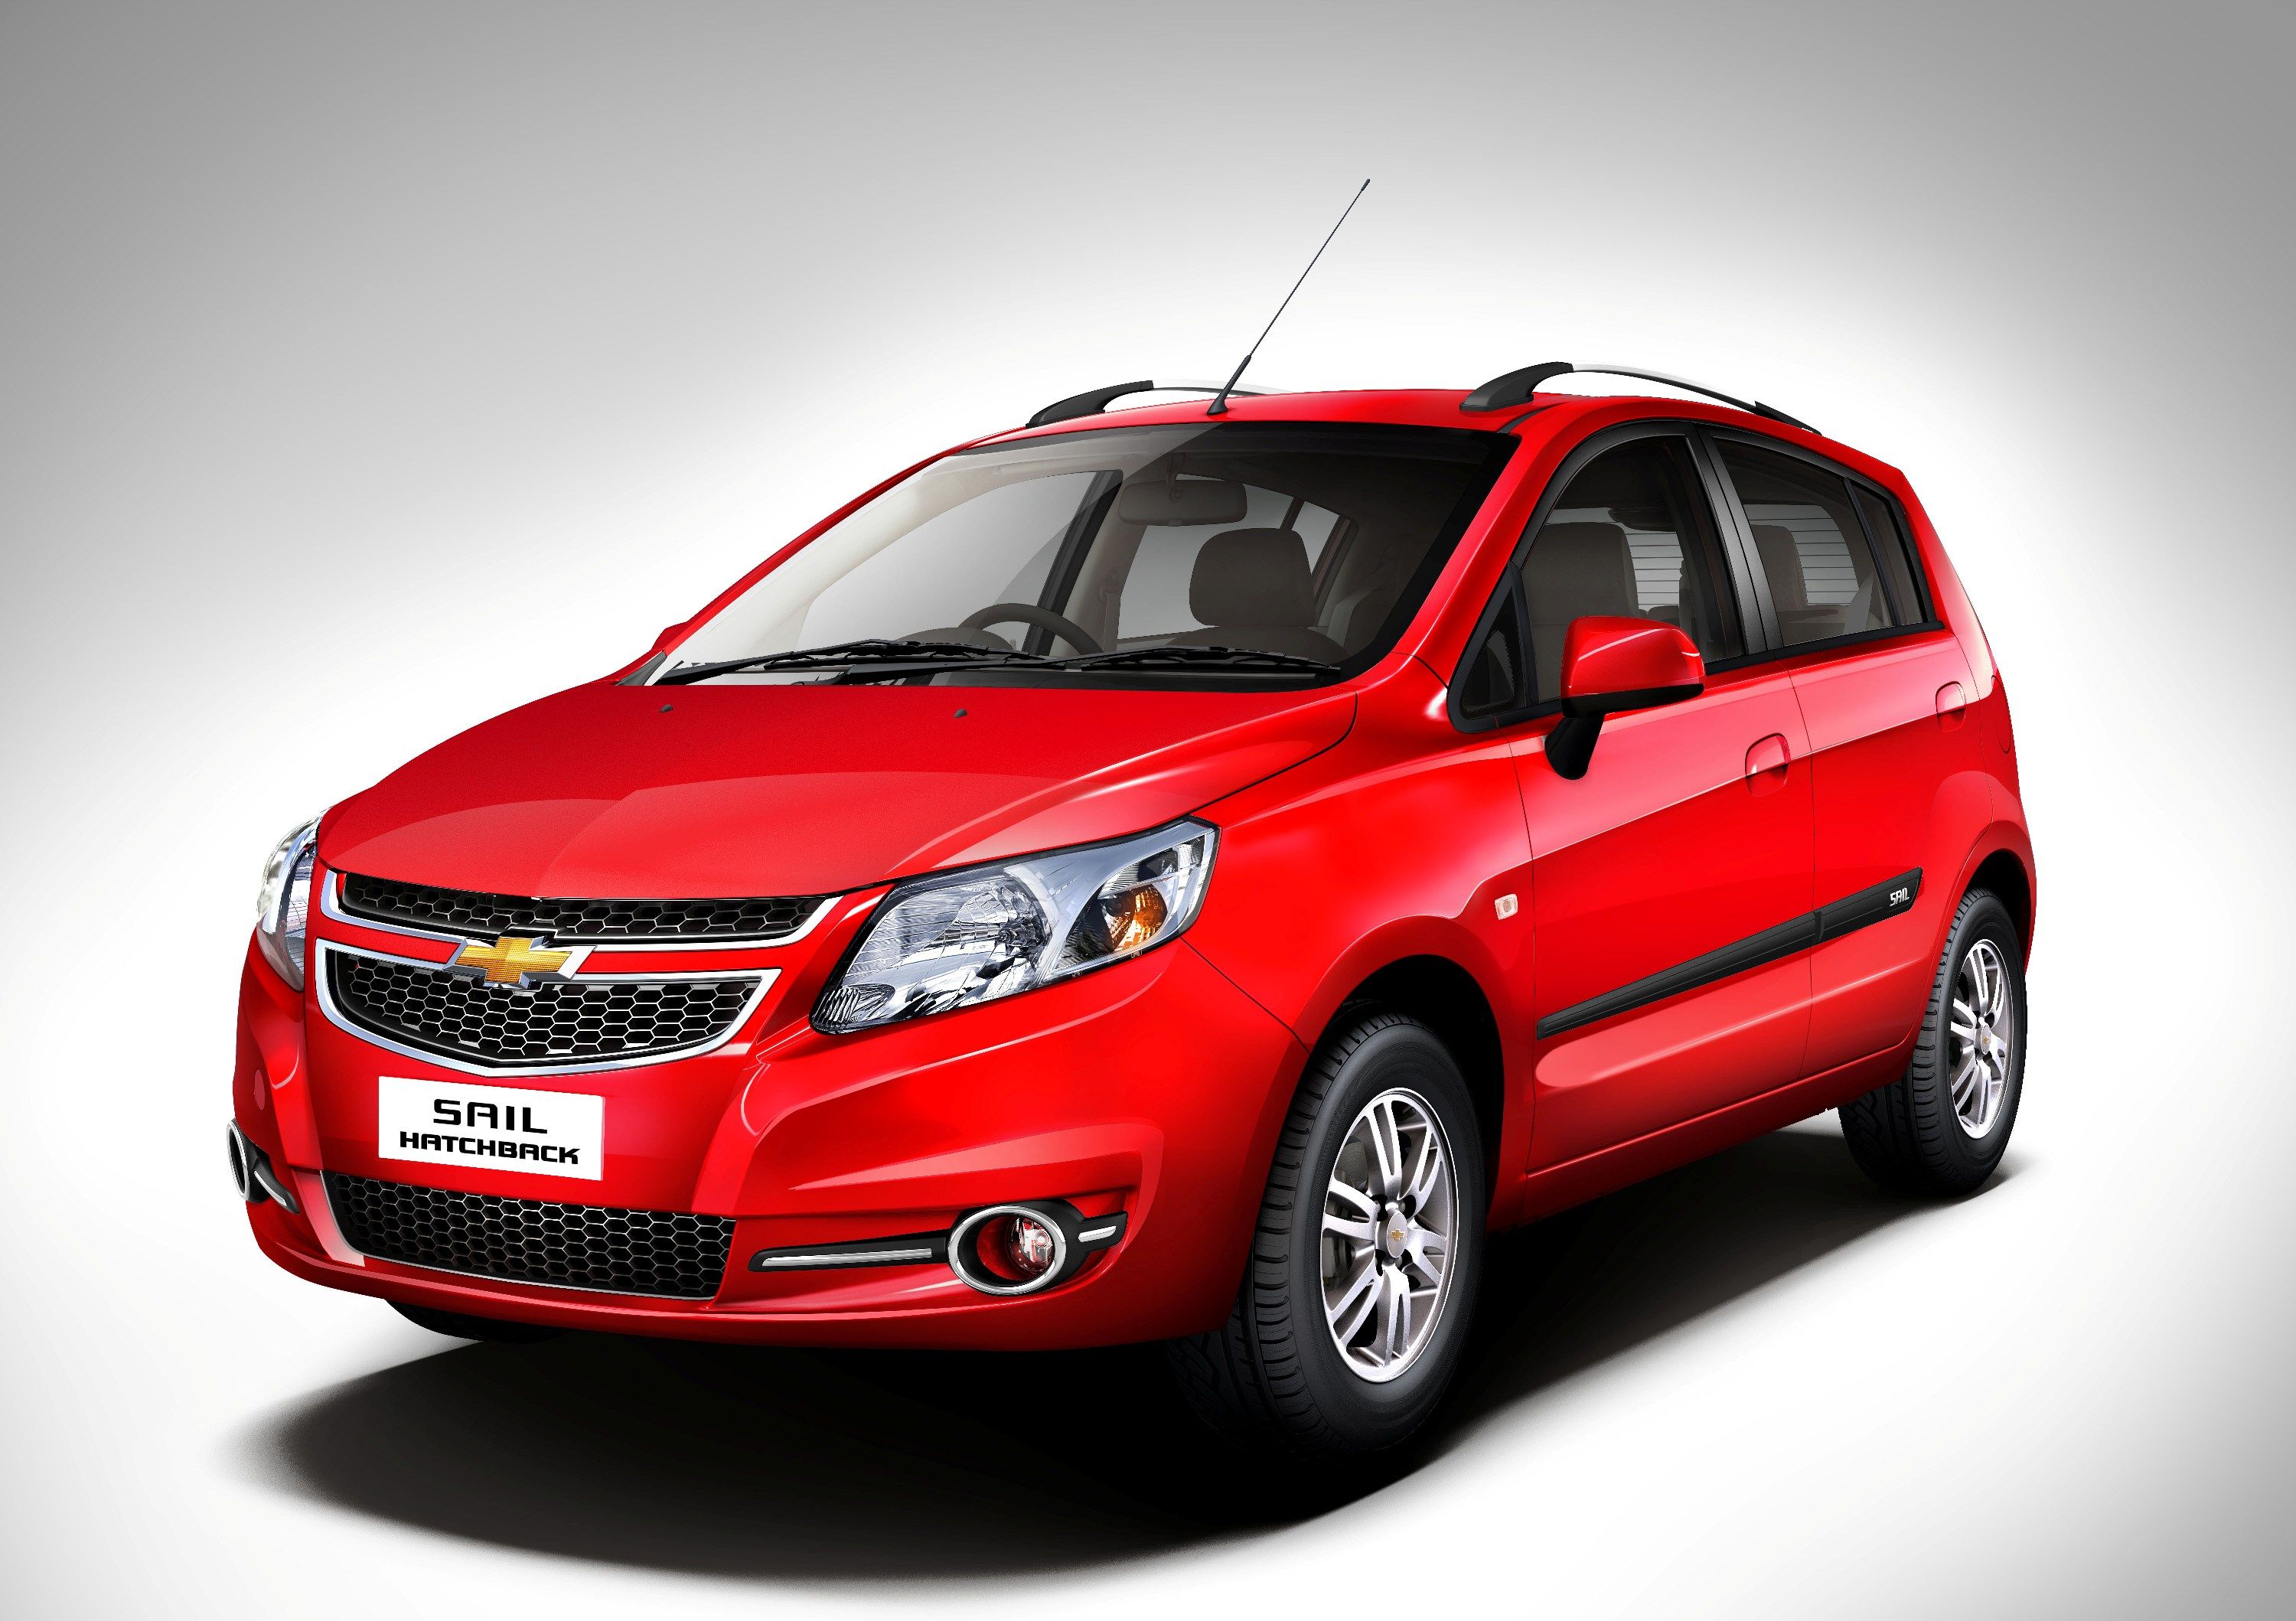 Chevrolet Sail Hatchback & Sedan: Features and Highlights